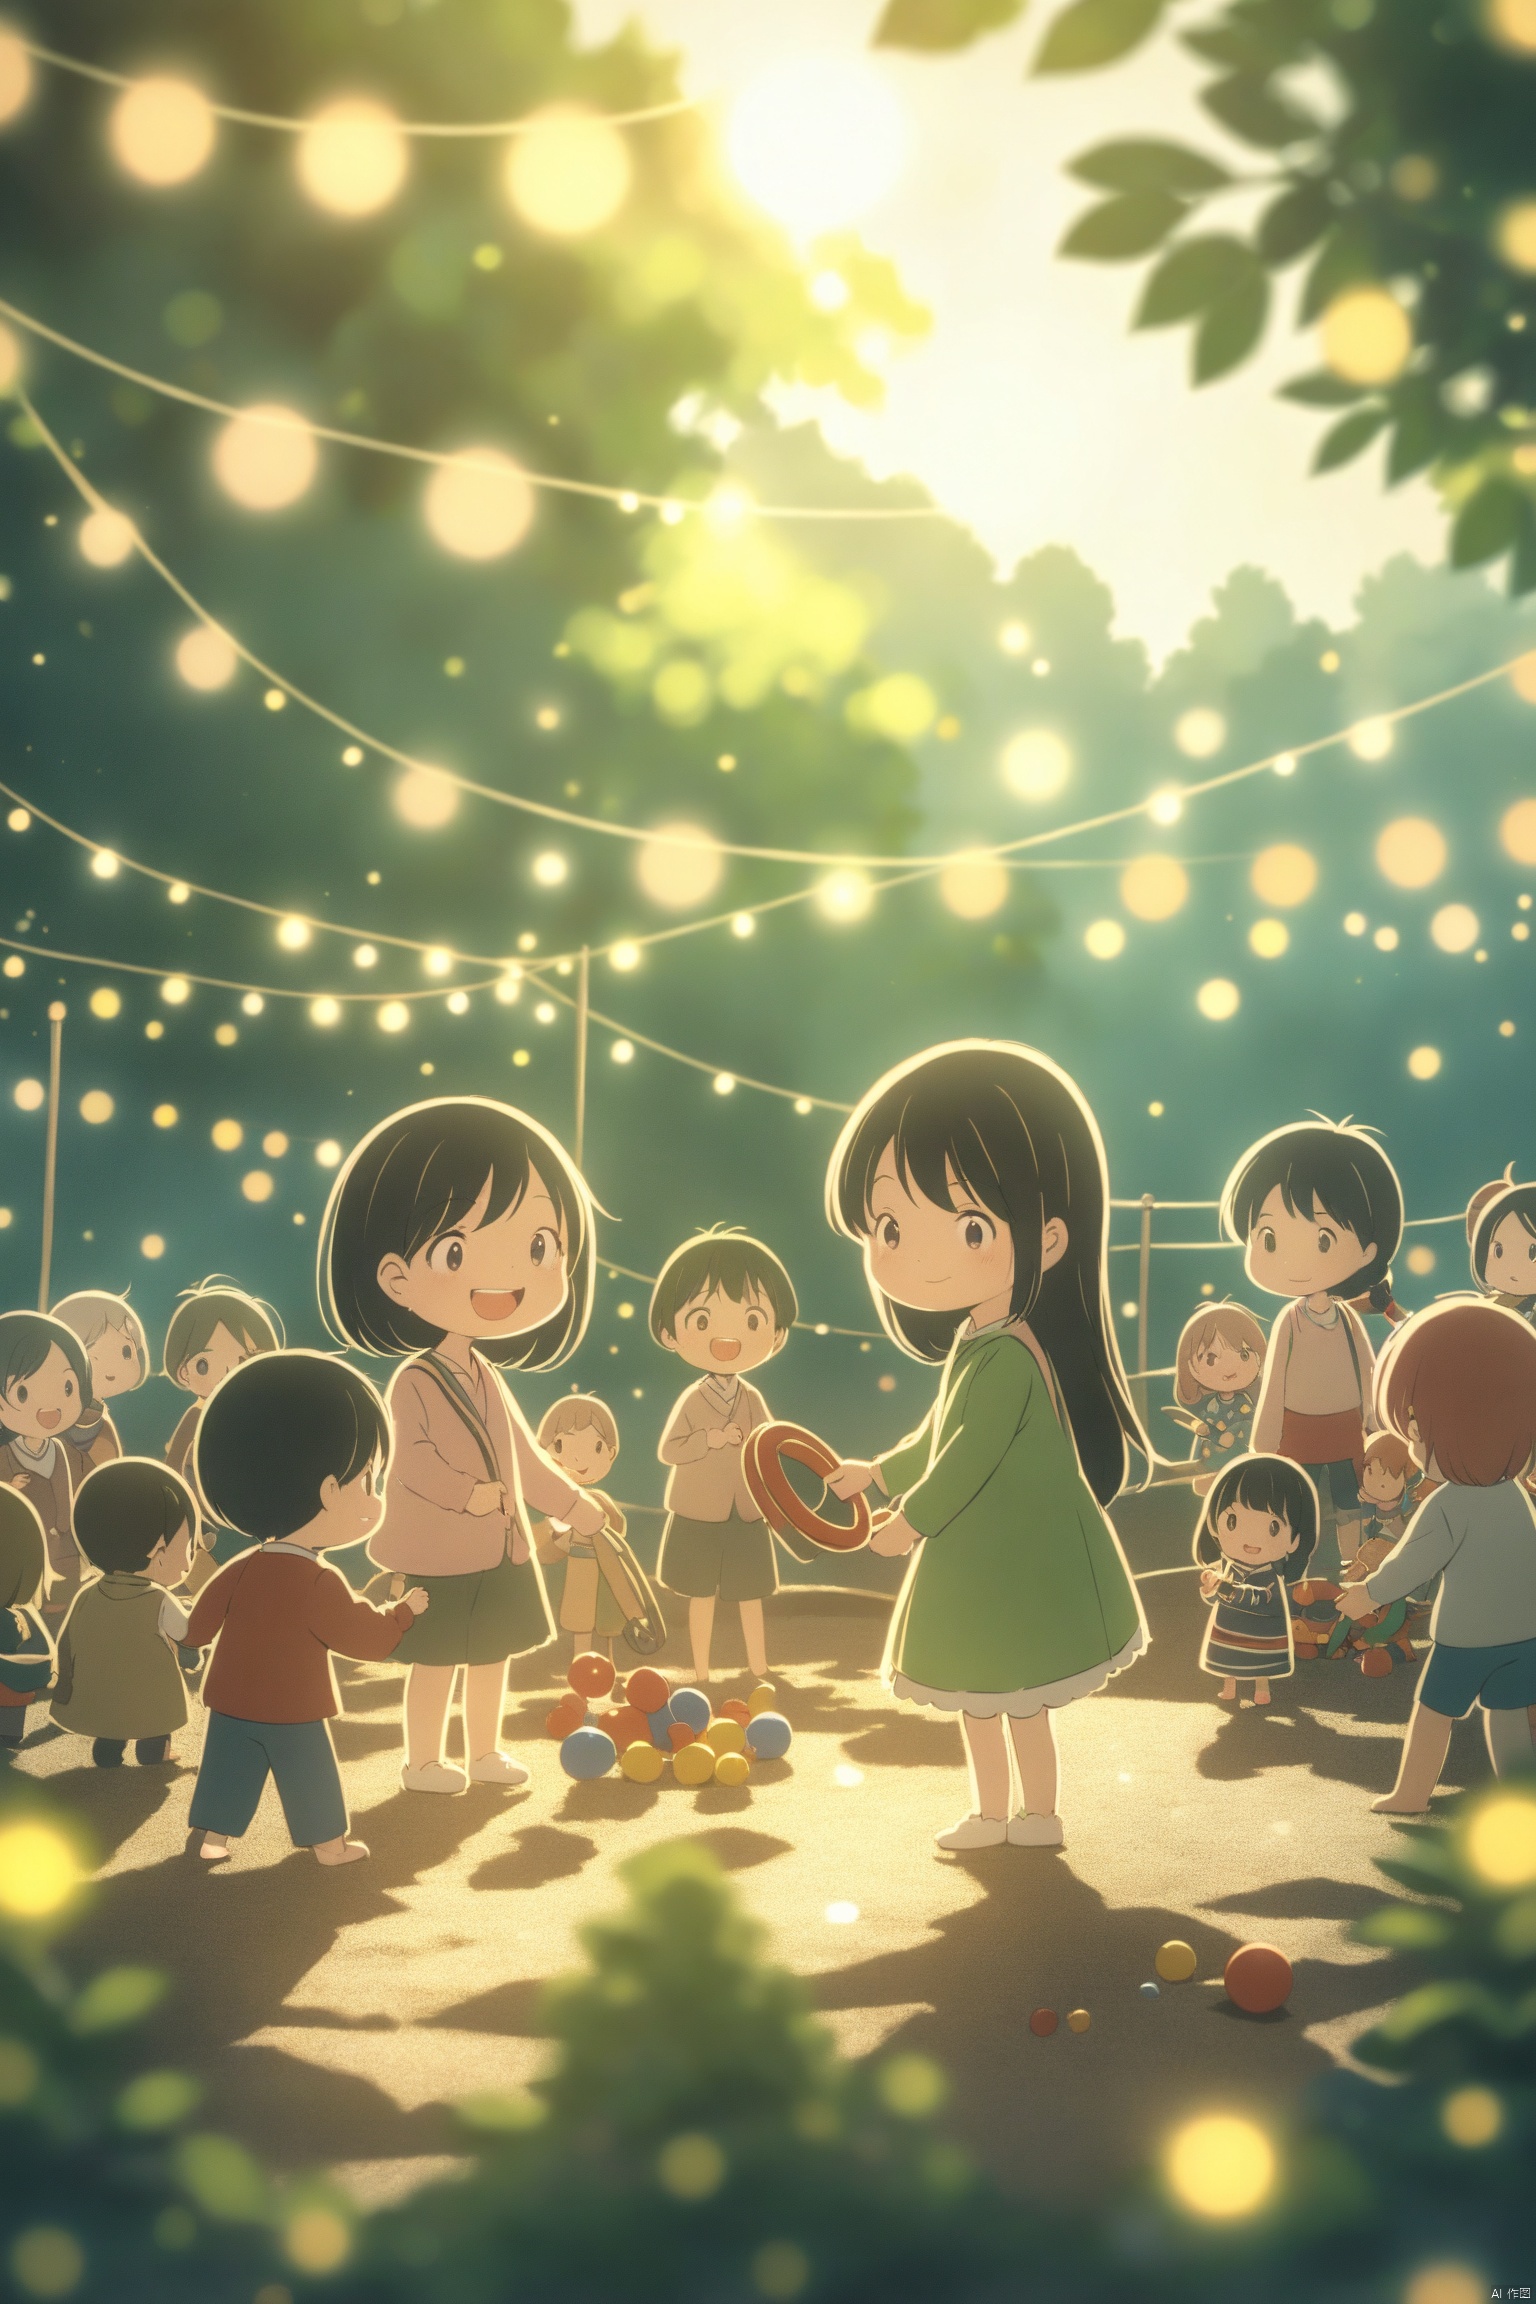 A whimsical illustration of a little girl playing in a playground with a few friends, surrounded by many children playing with toys, the illustration style is reminiscent of Japanese anime, the characters have cartoon-like features, the party holiday decoration scene blends into Japanese anime Stylish decorative elements